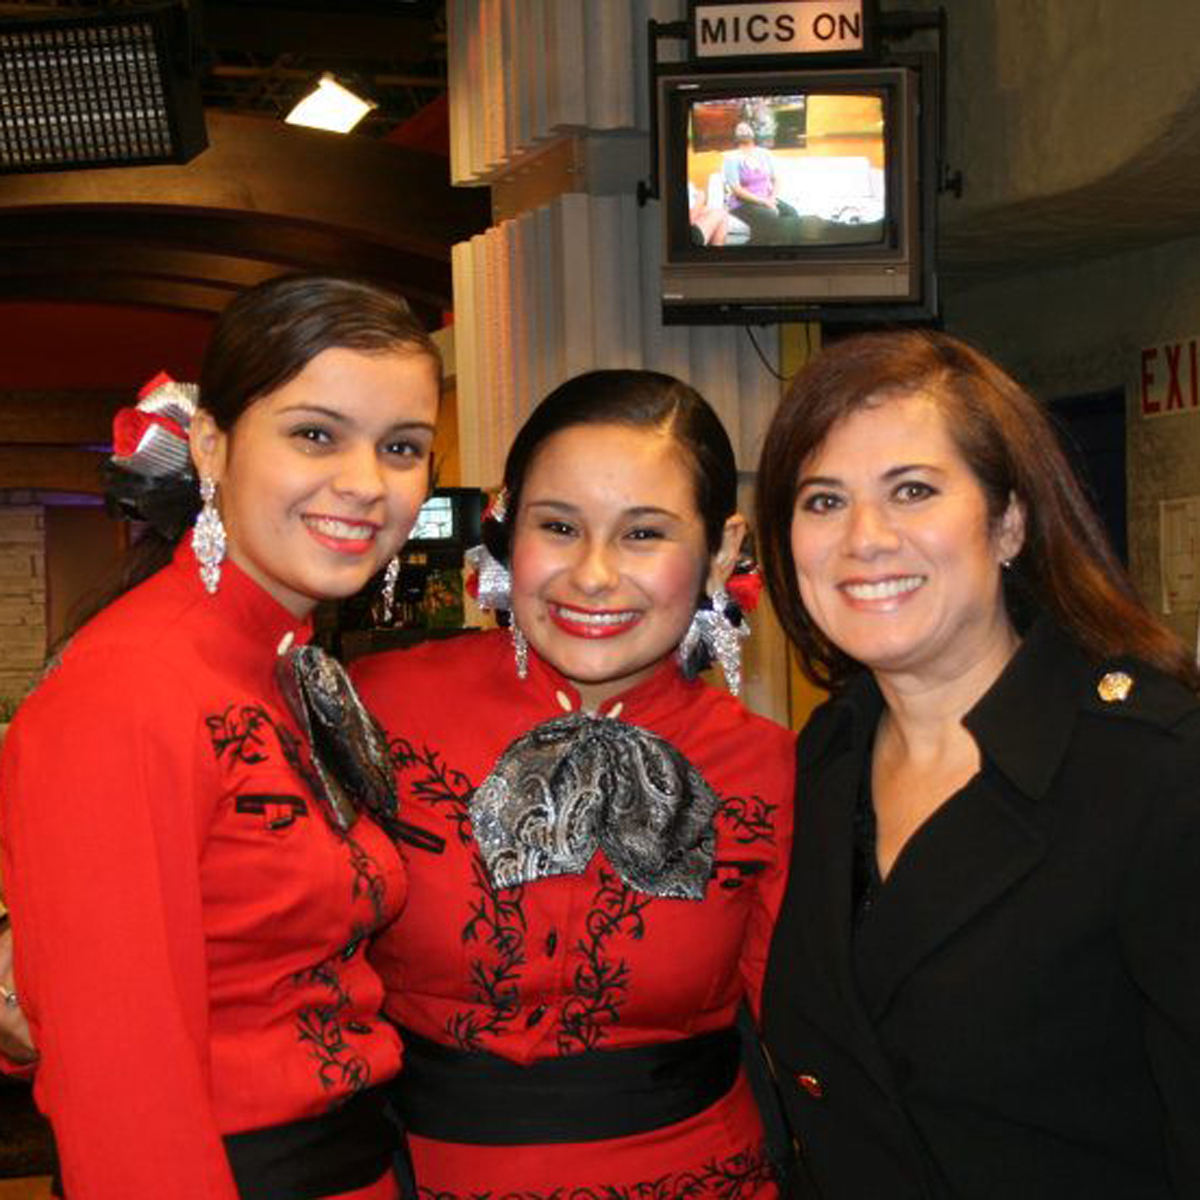 Cynthia Muñoz is a constant promoter of mariachi music and musicians. Pictured above is a photo of Cynthia and students from Fox Tech High School’s Mariachi in San Antonio during a television interview at a San Antonio TV station for a previous Mariach